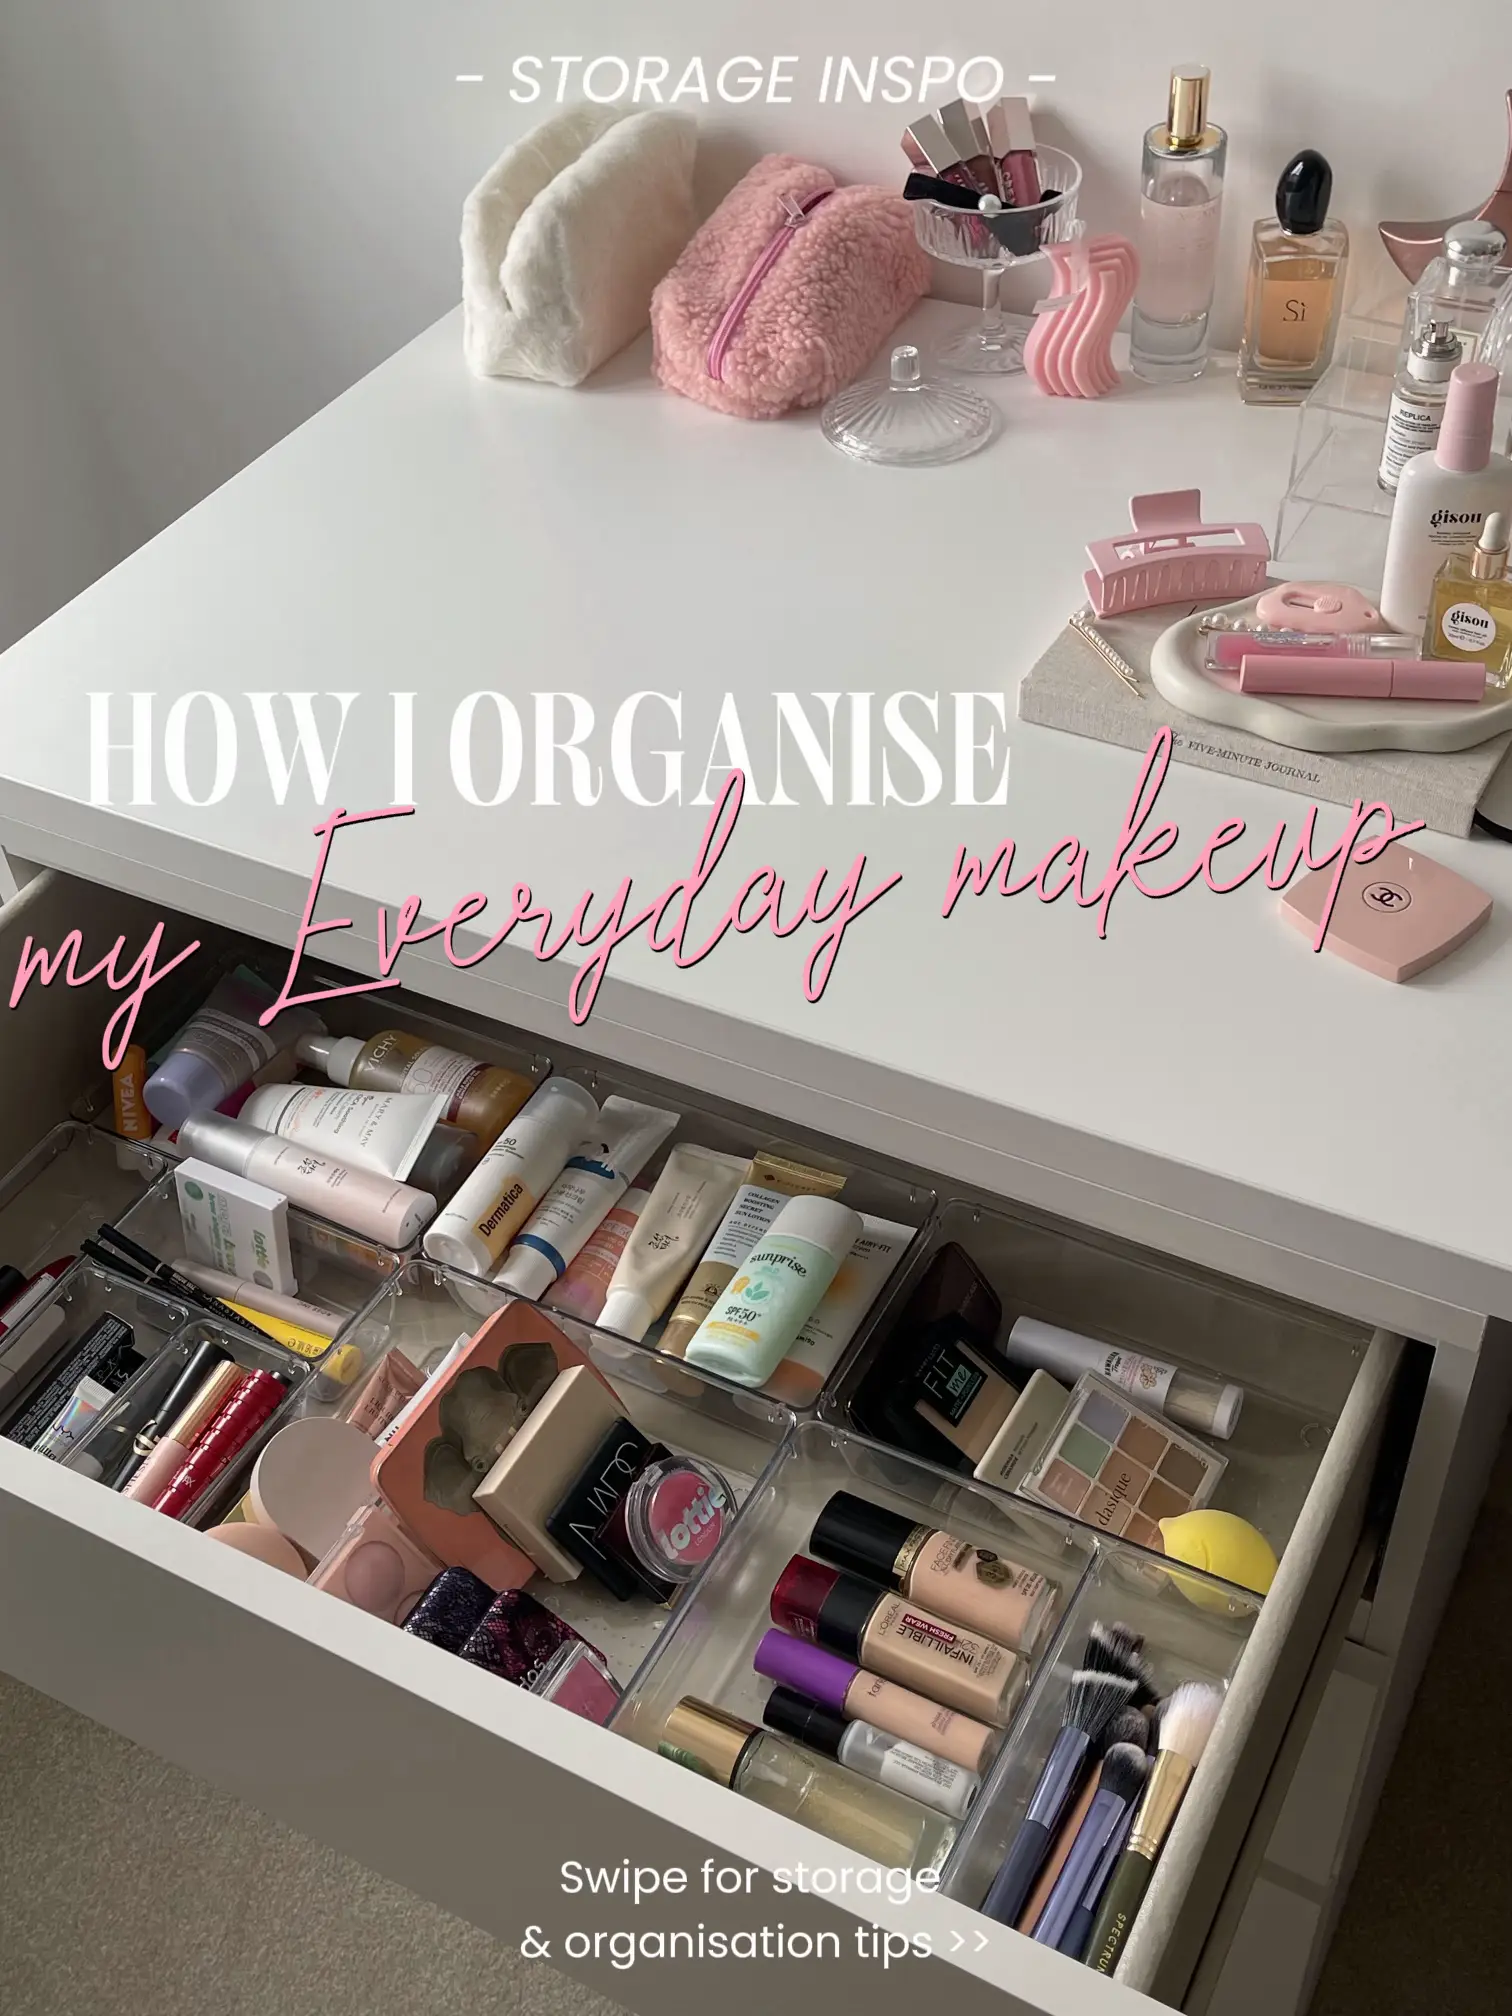 APARTMENT FINDS - MAKEUP ORG, Gallery posted by Jordyn Friedman